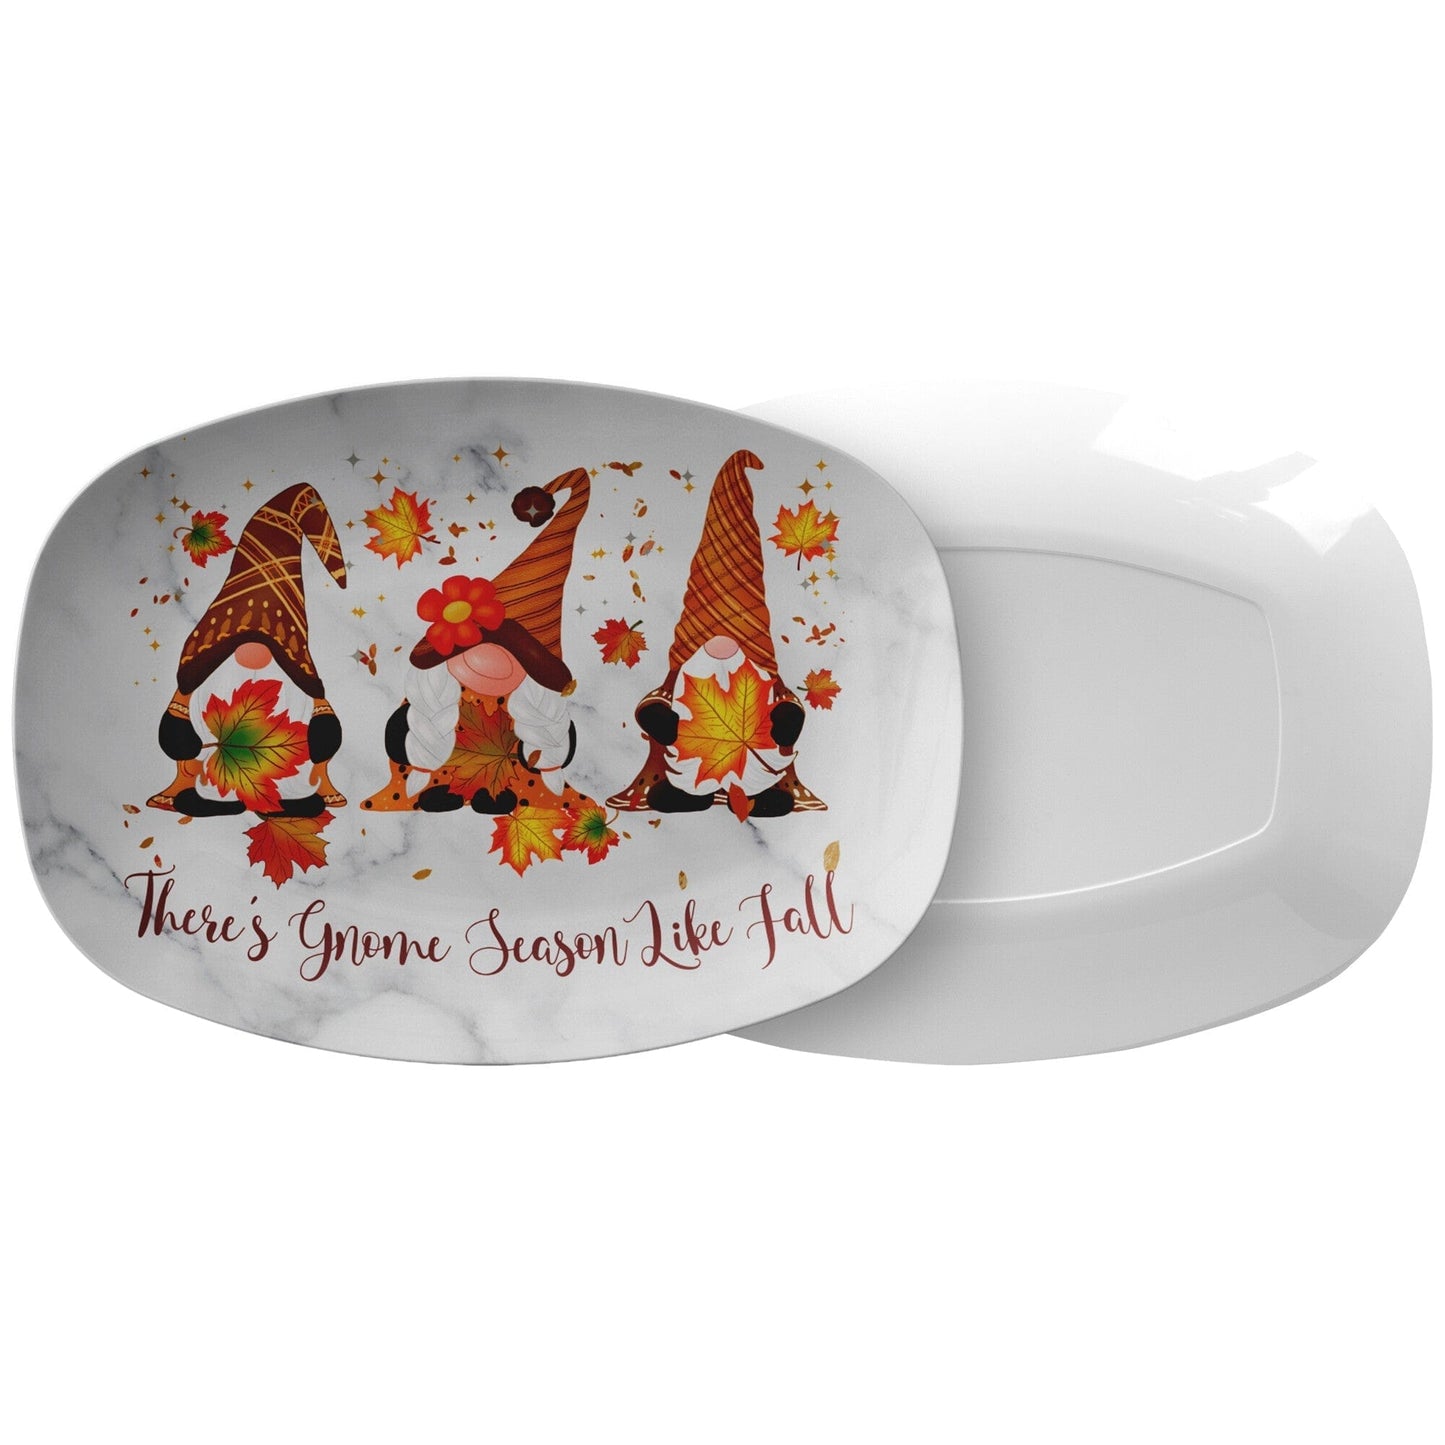 Kate McEnroe New York Fall Gnome Serving Platters with Phrase Theres Gnome Season Like Fall Serving Platters